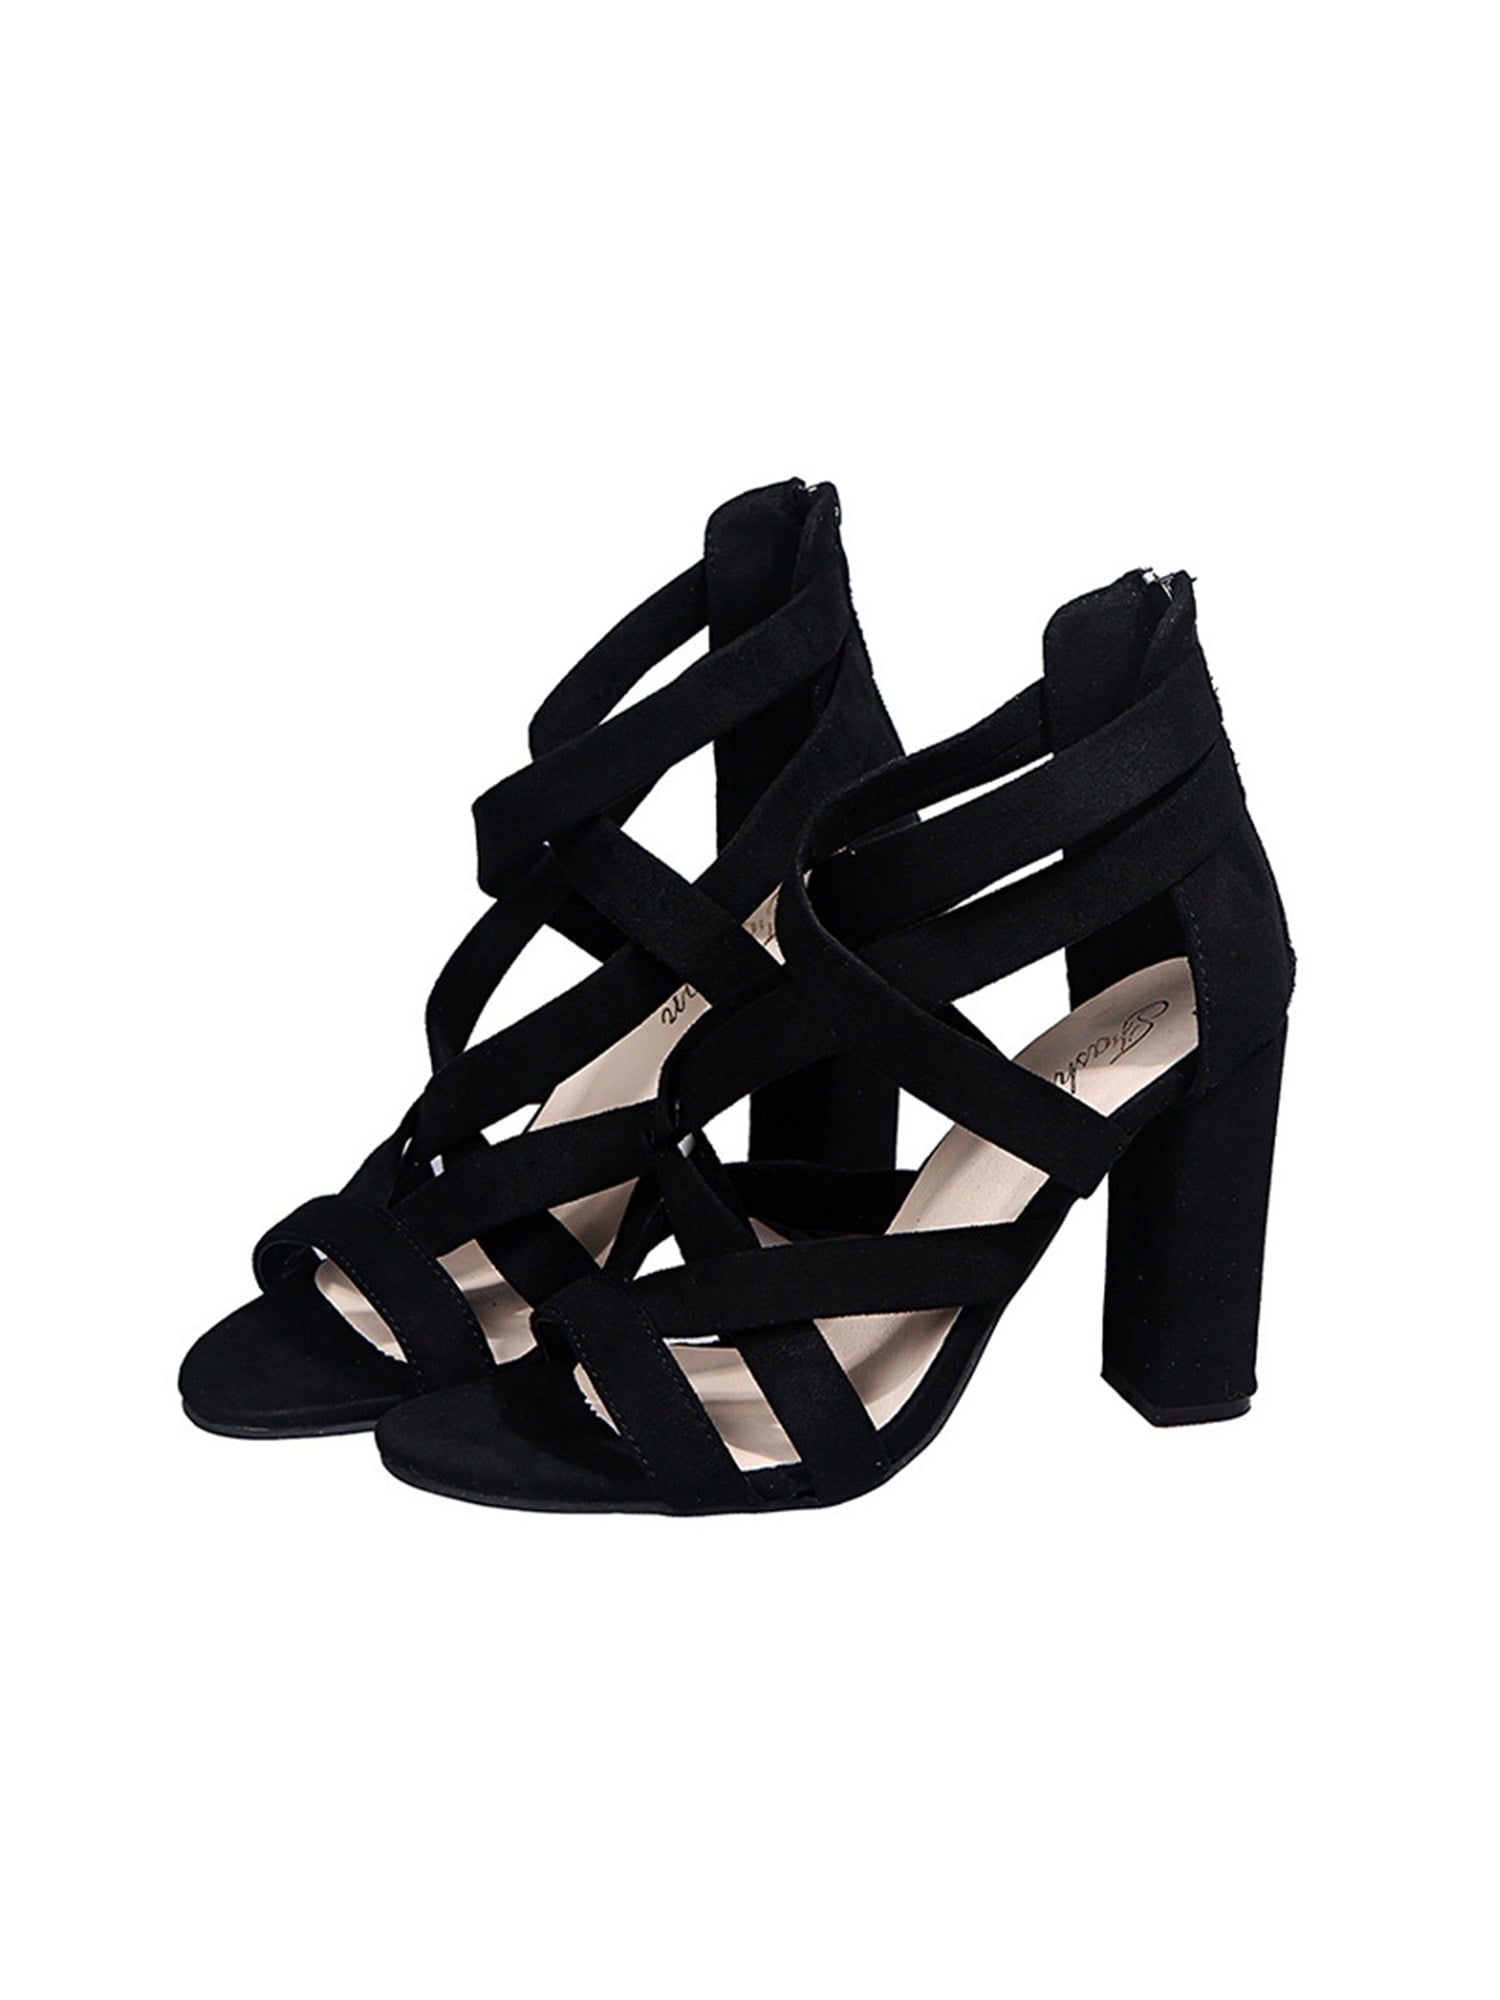 Black transparent Heels Open Toe Chunky Heels Strappy Sandals|FSJshoes